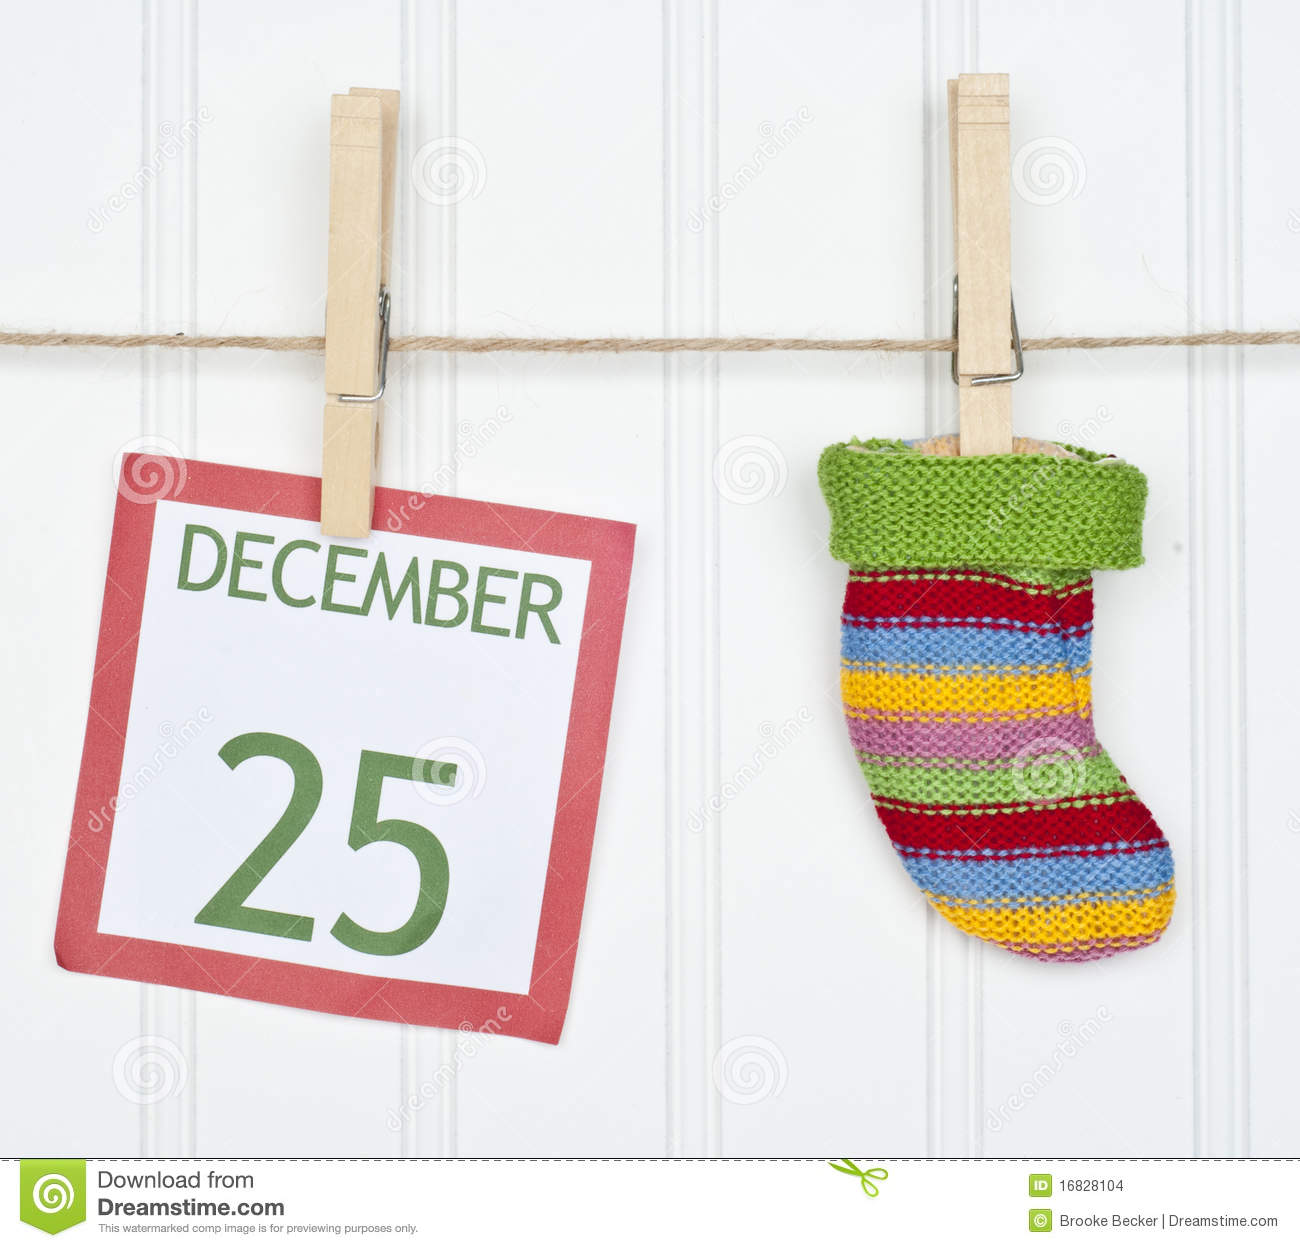 Holiday Stocking Or Sock On A Clothesline With A Christmas Calendar